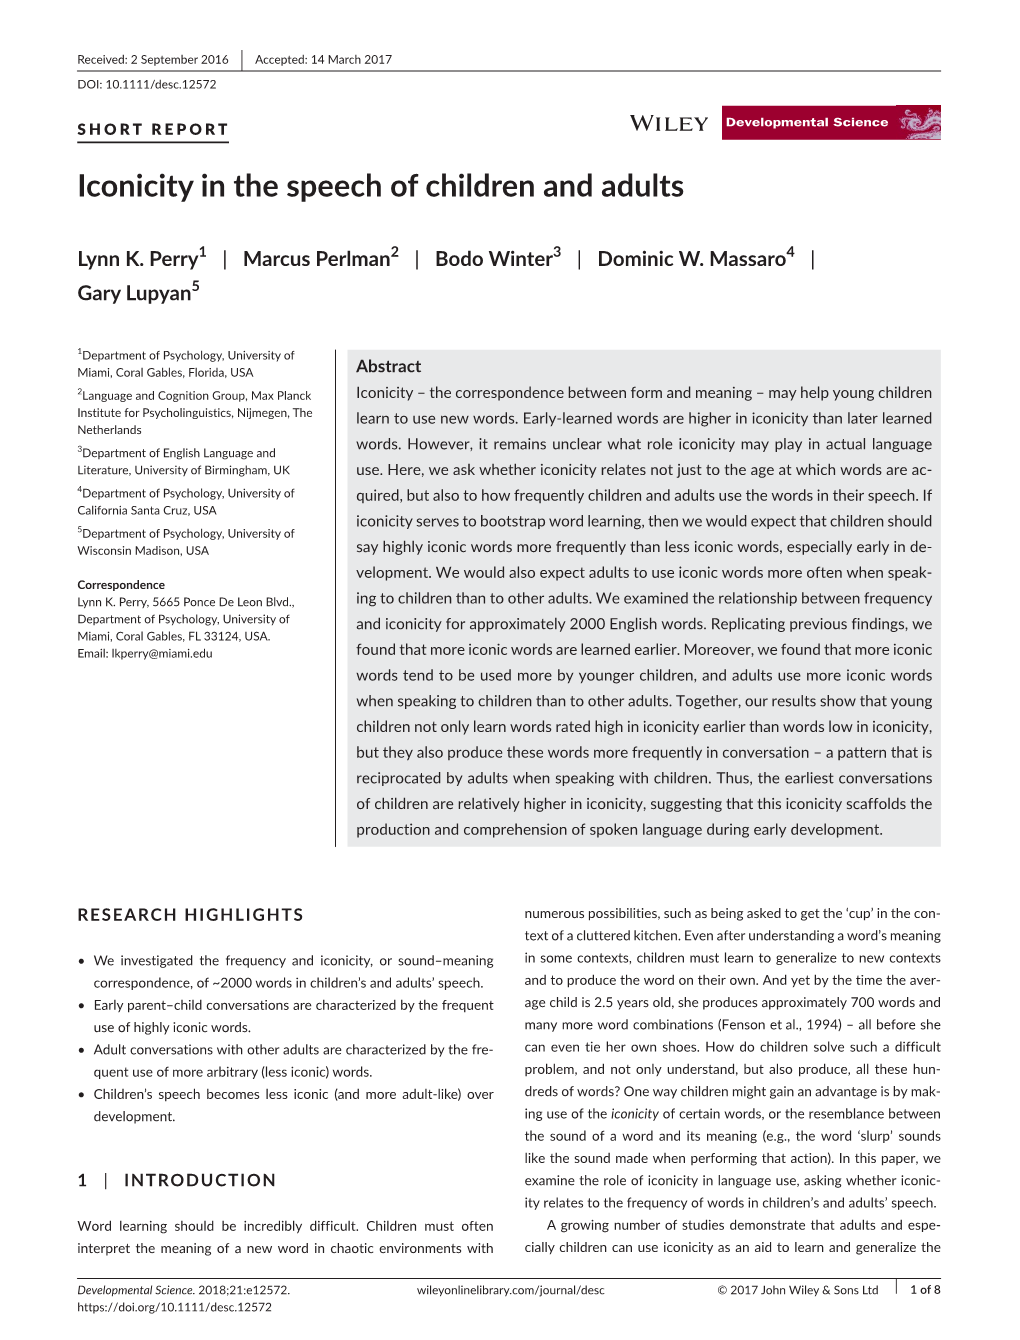 Iconicity in the Speech of Children and Adults